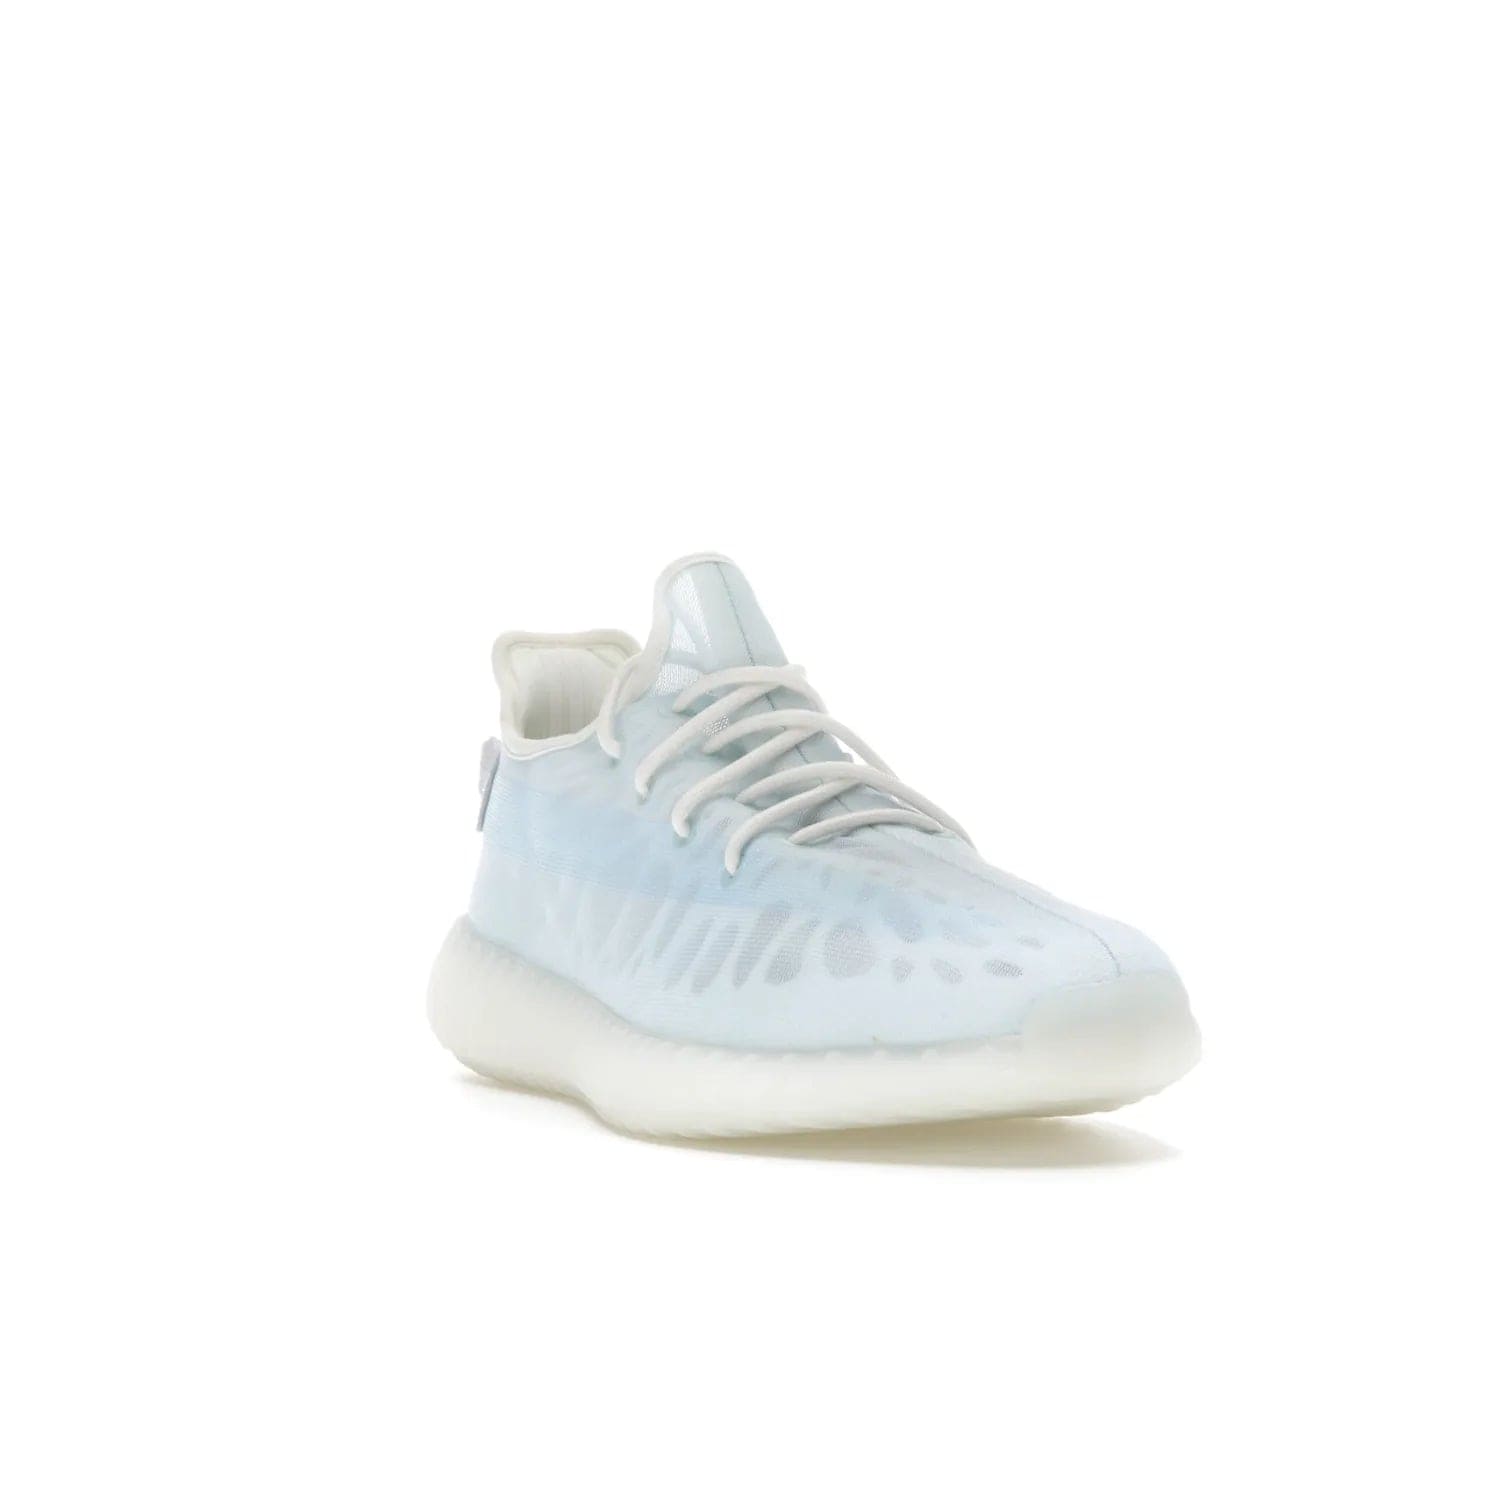 adidas Yeezy Boost 350 V2 Mono Ice - Image 7 - Only at www.BallersClubKickz.com - Introducing the adidas Yeezy 350 V2 Mono Ice - a sleek monofilament mesh design in Ice blue with Boost sole and heel pull tab. Released exclusively in the US for $220.